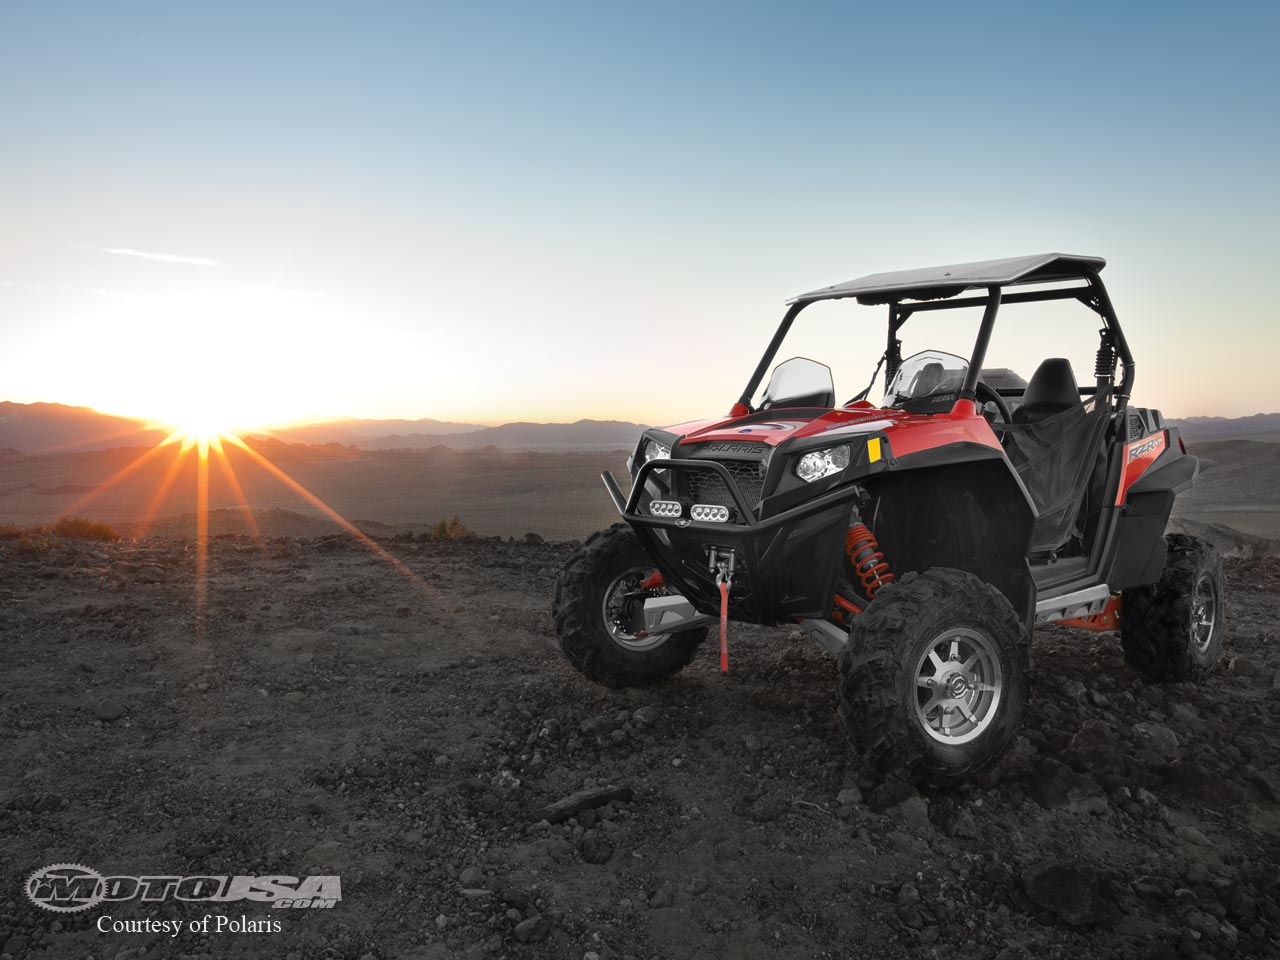 Polaris Ranger Rzr Xp First Look Picture Of Motorcycle